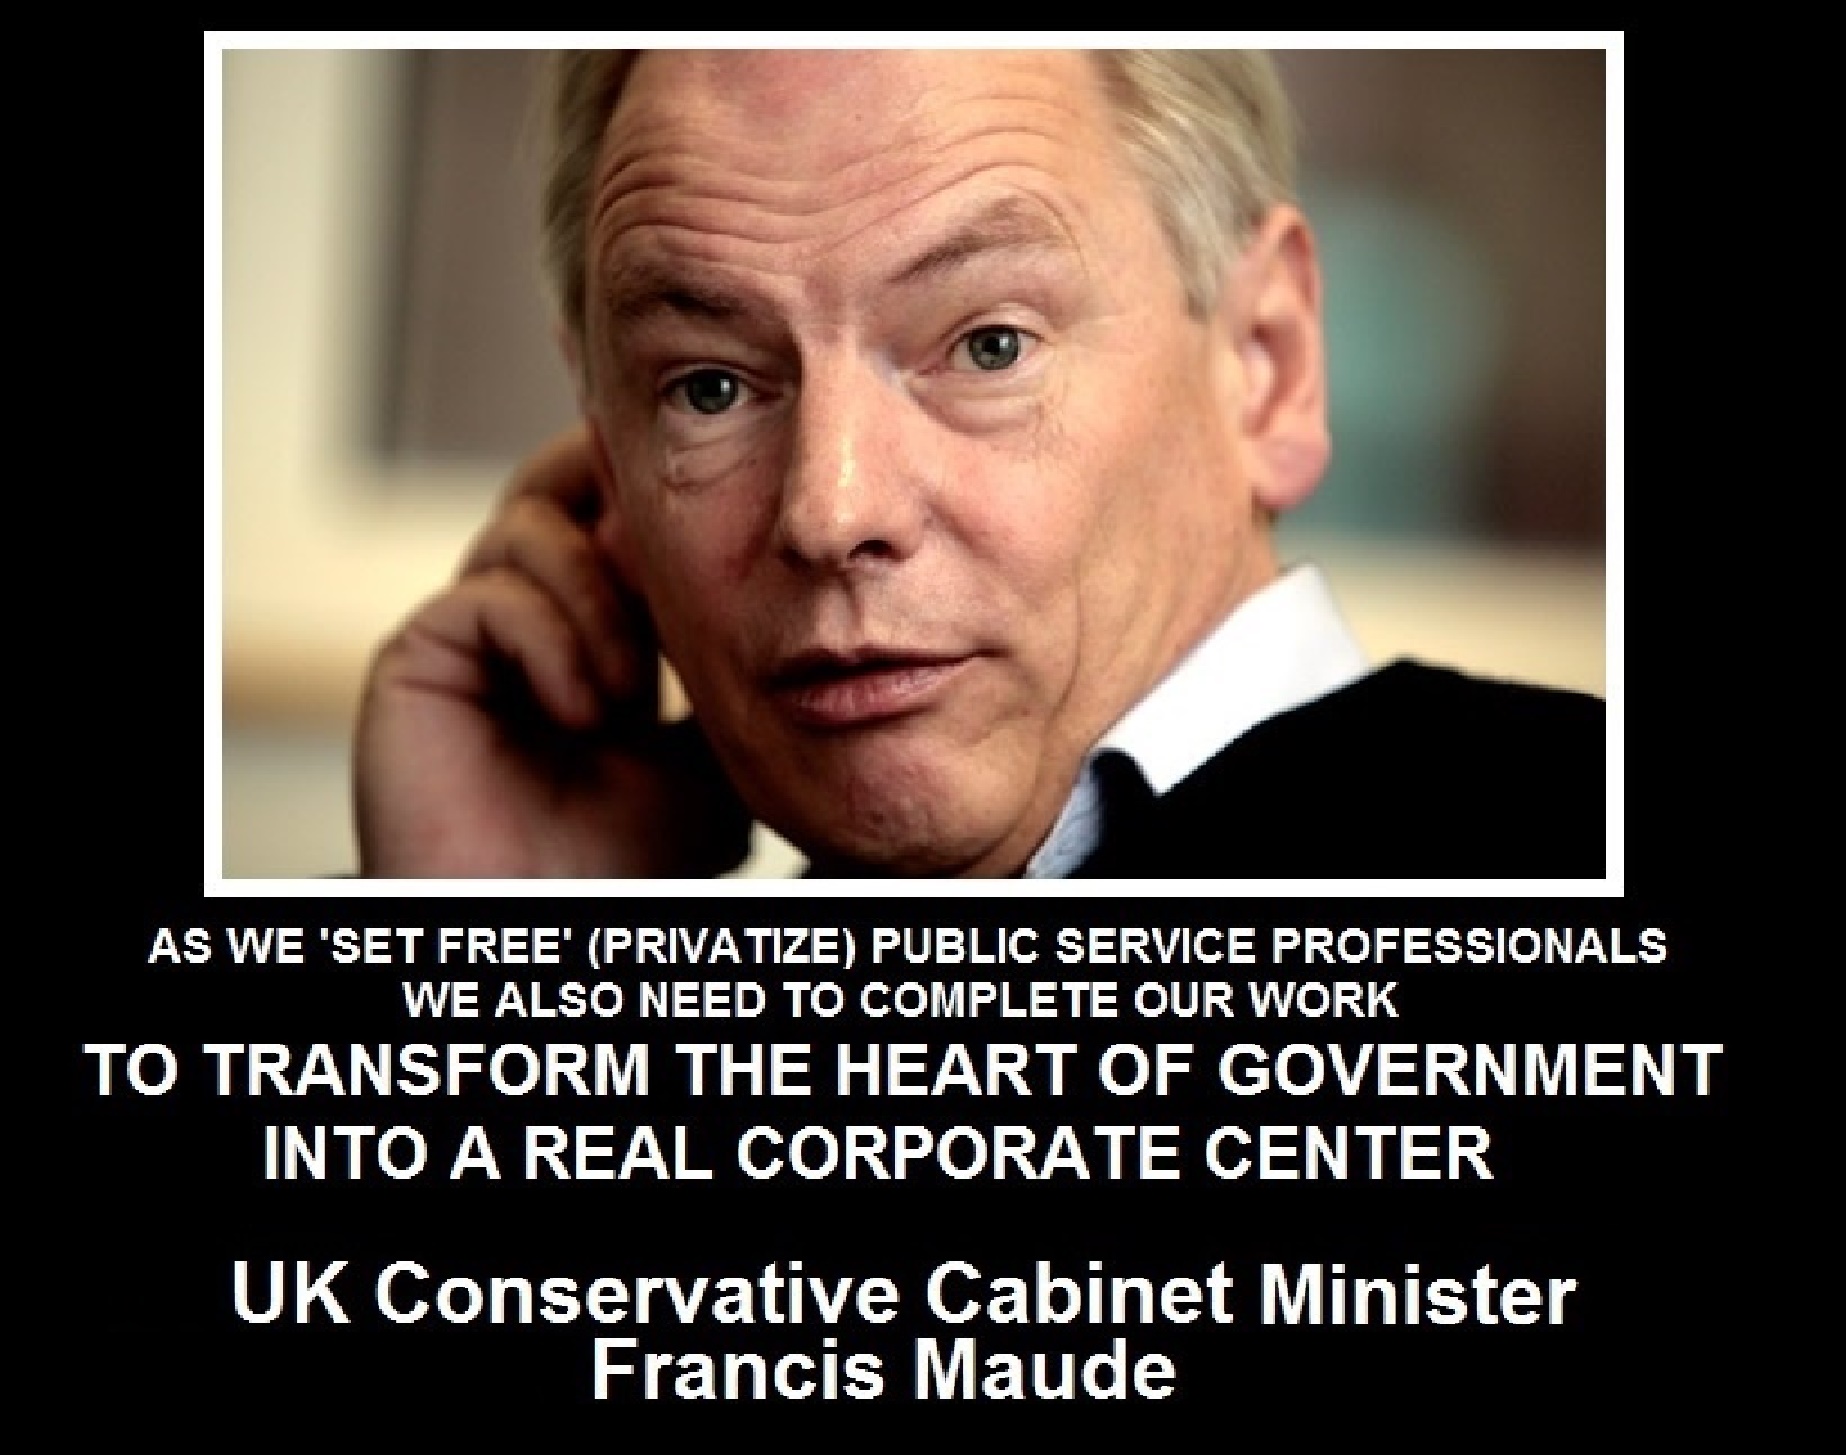 Oligary at the Heart of Government - Francis Maude